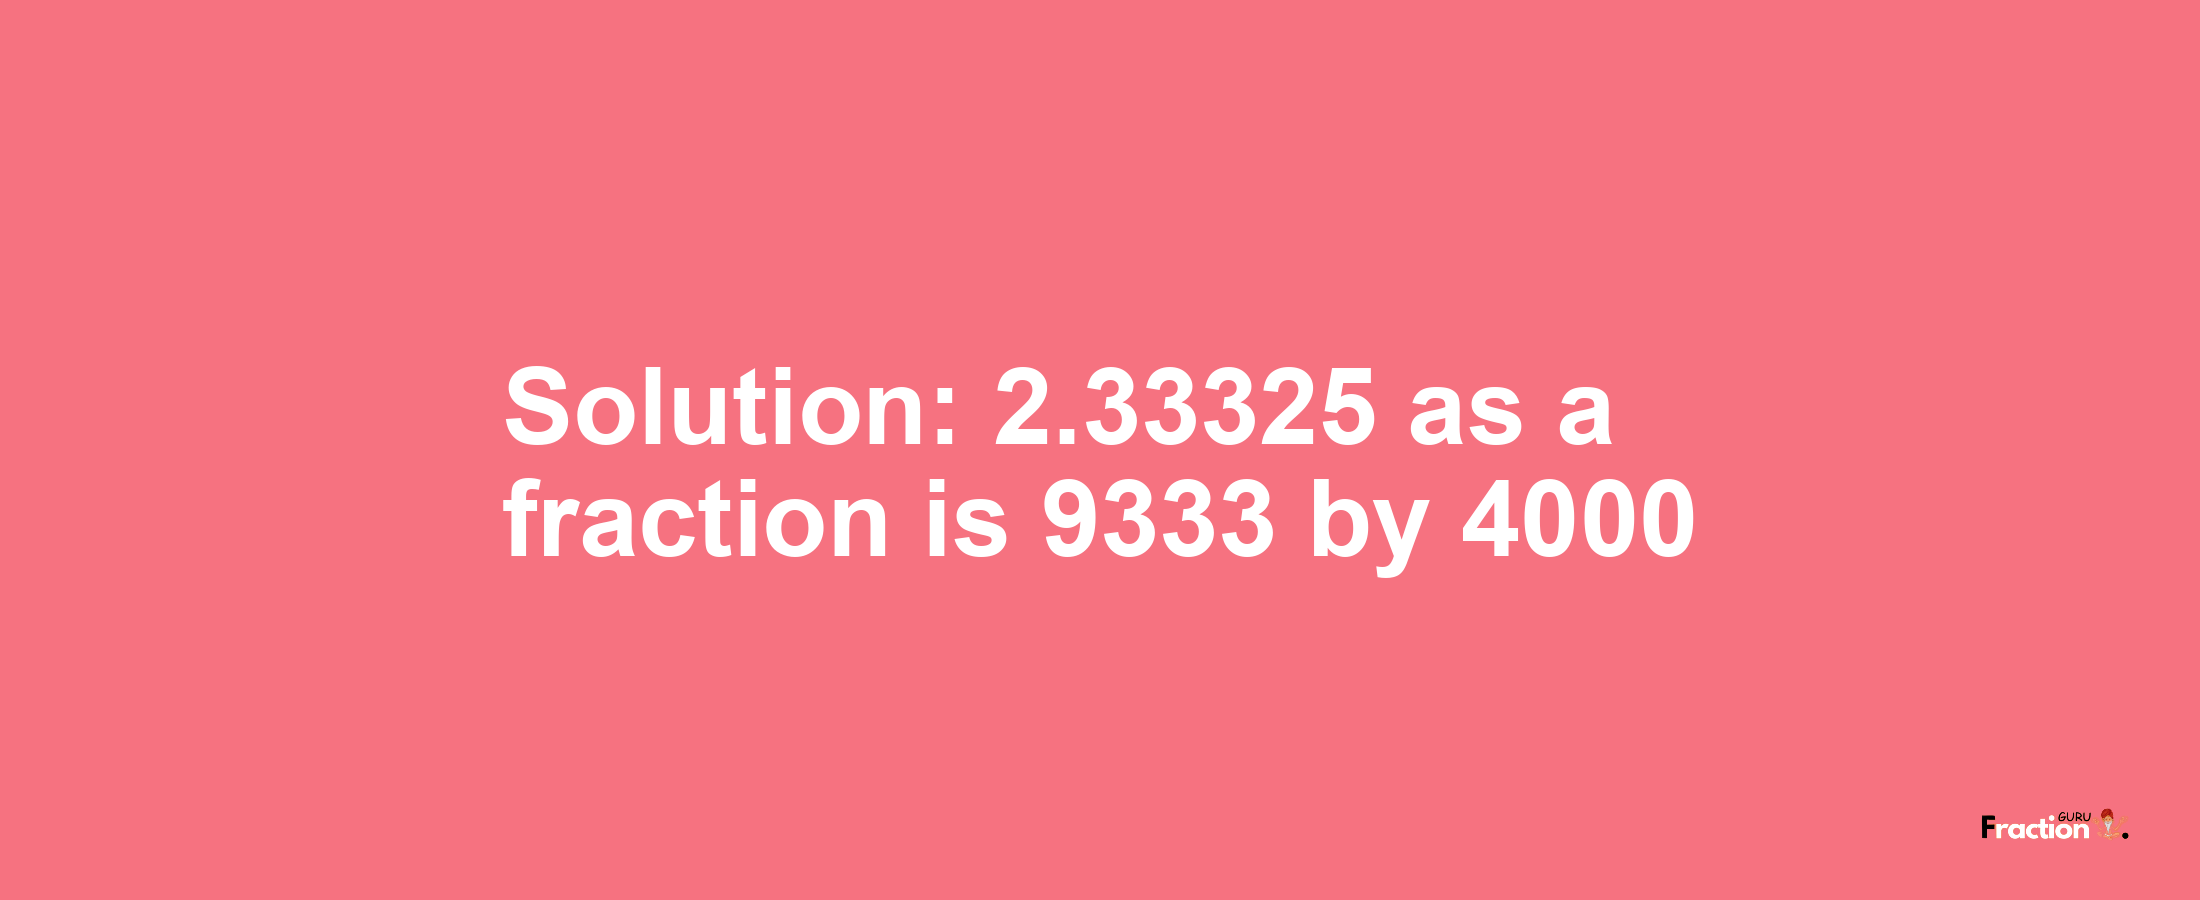 Solution:2.33325 as a fraction is 9333/4000